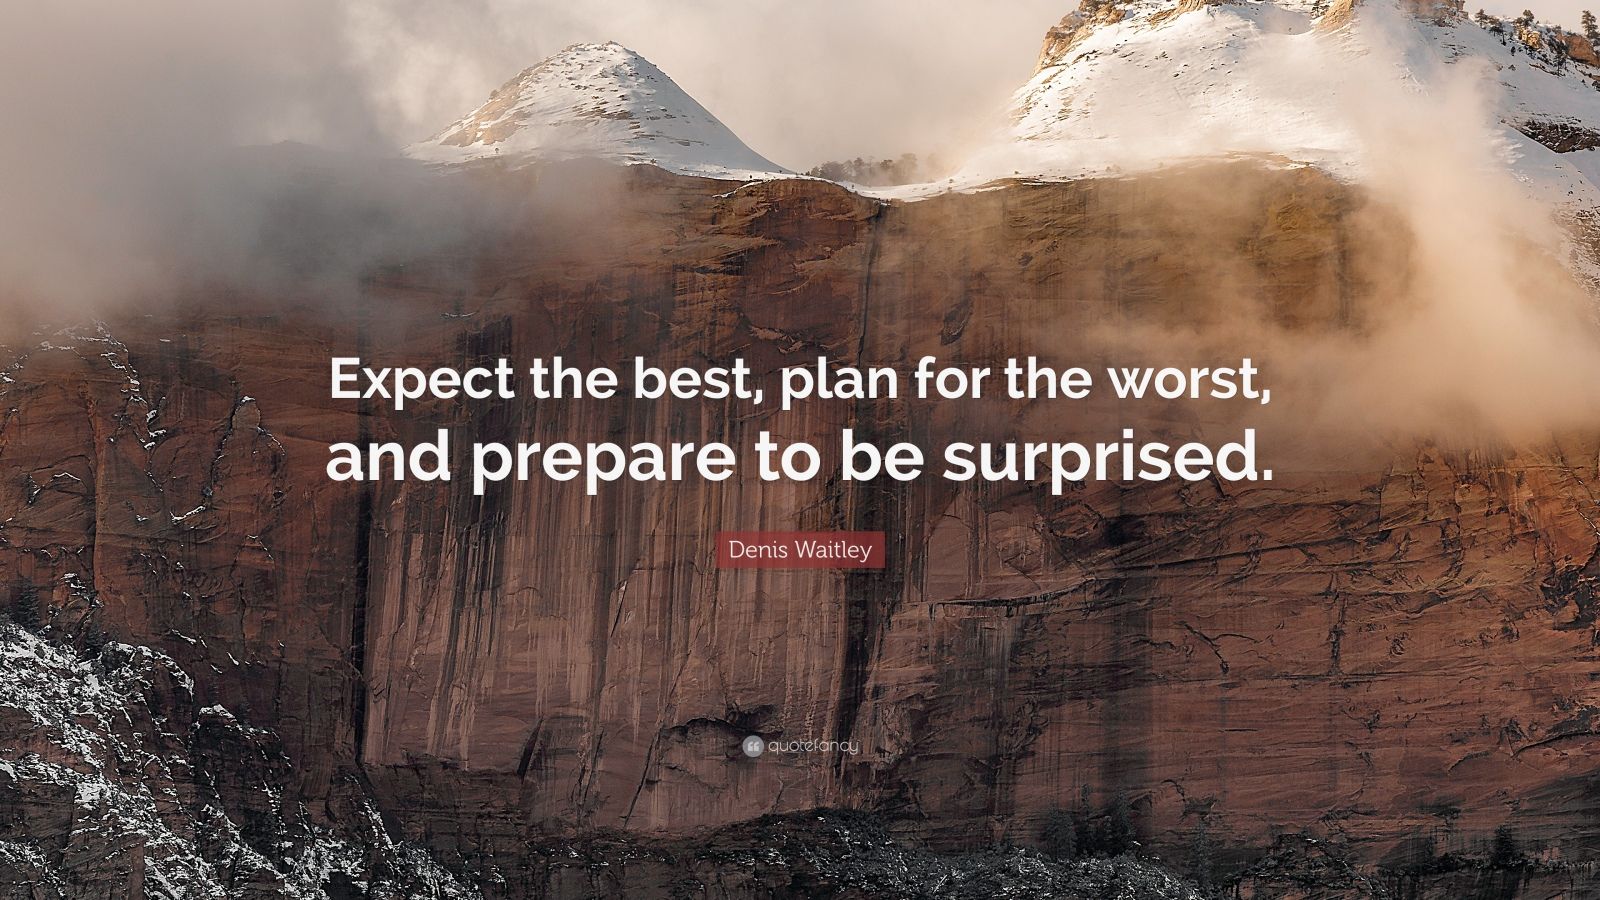 Denis Waitley Quote: “Expect the best, plan for the worst, and prepare